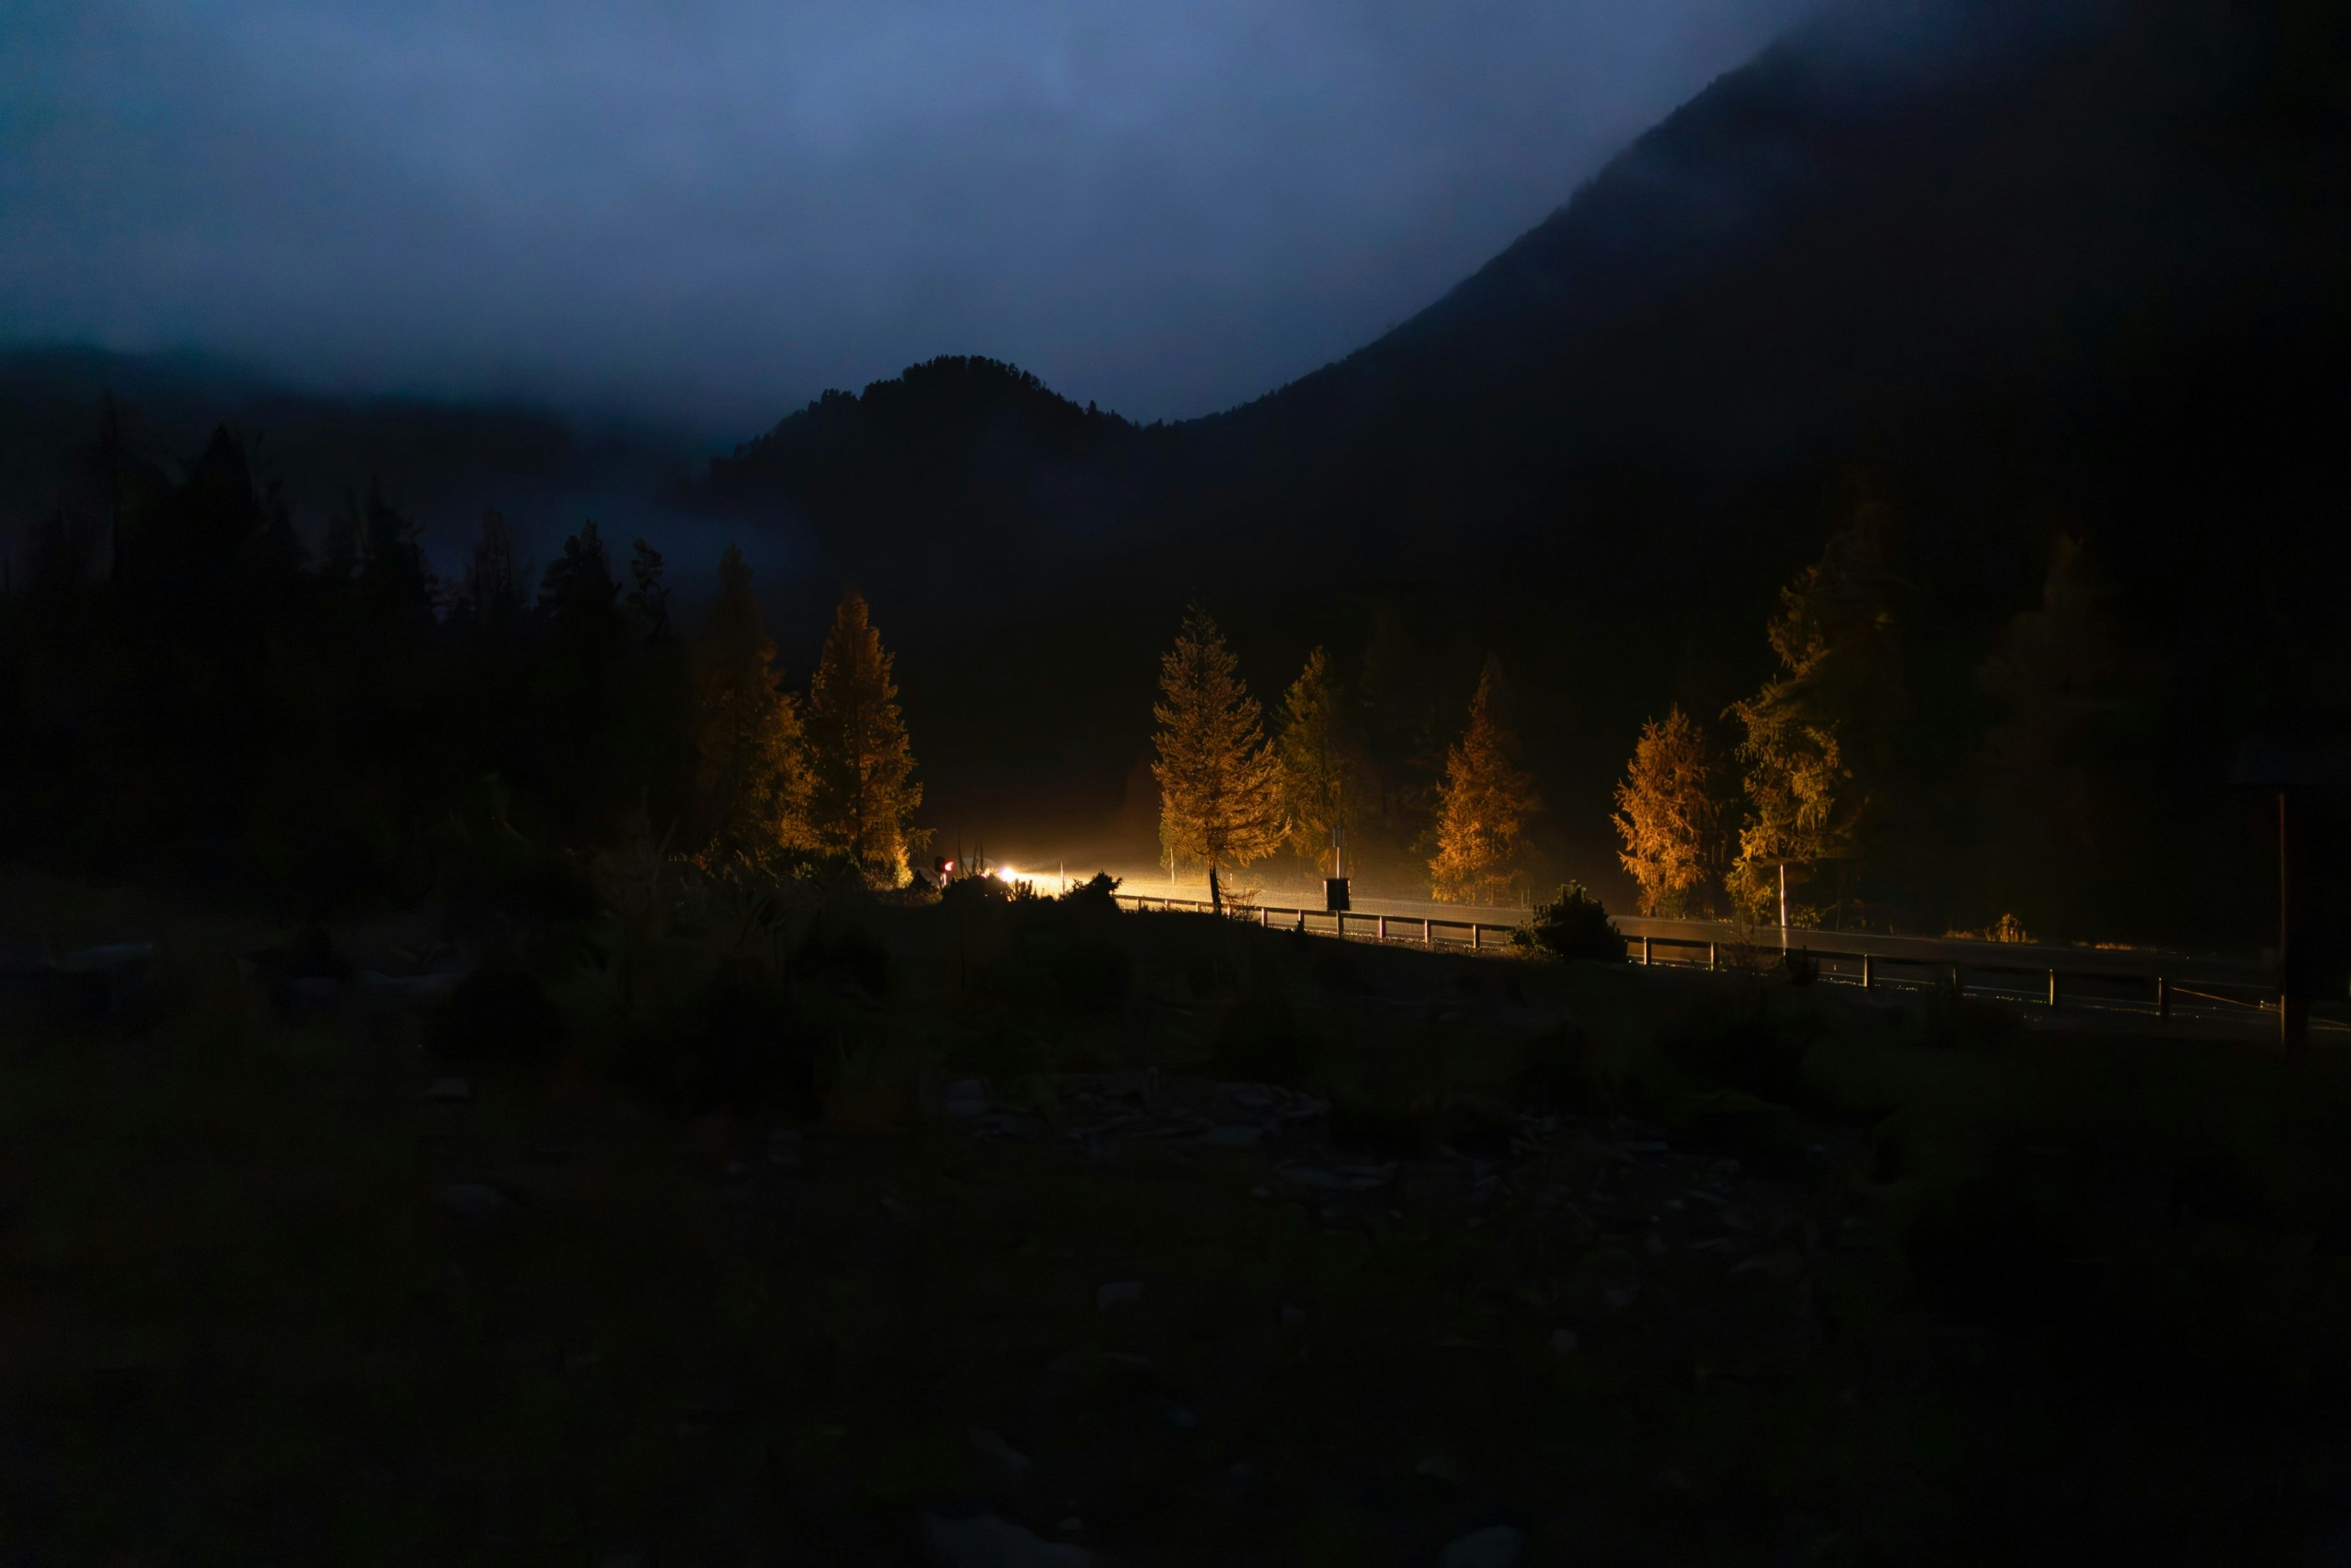 a foggy night in the mountains